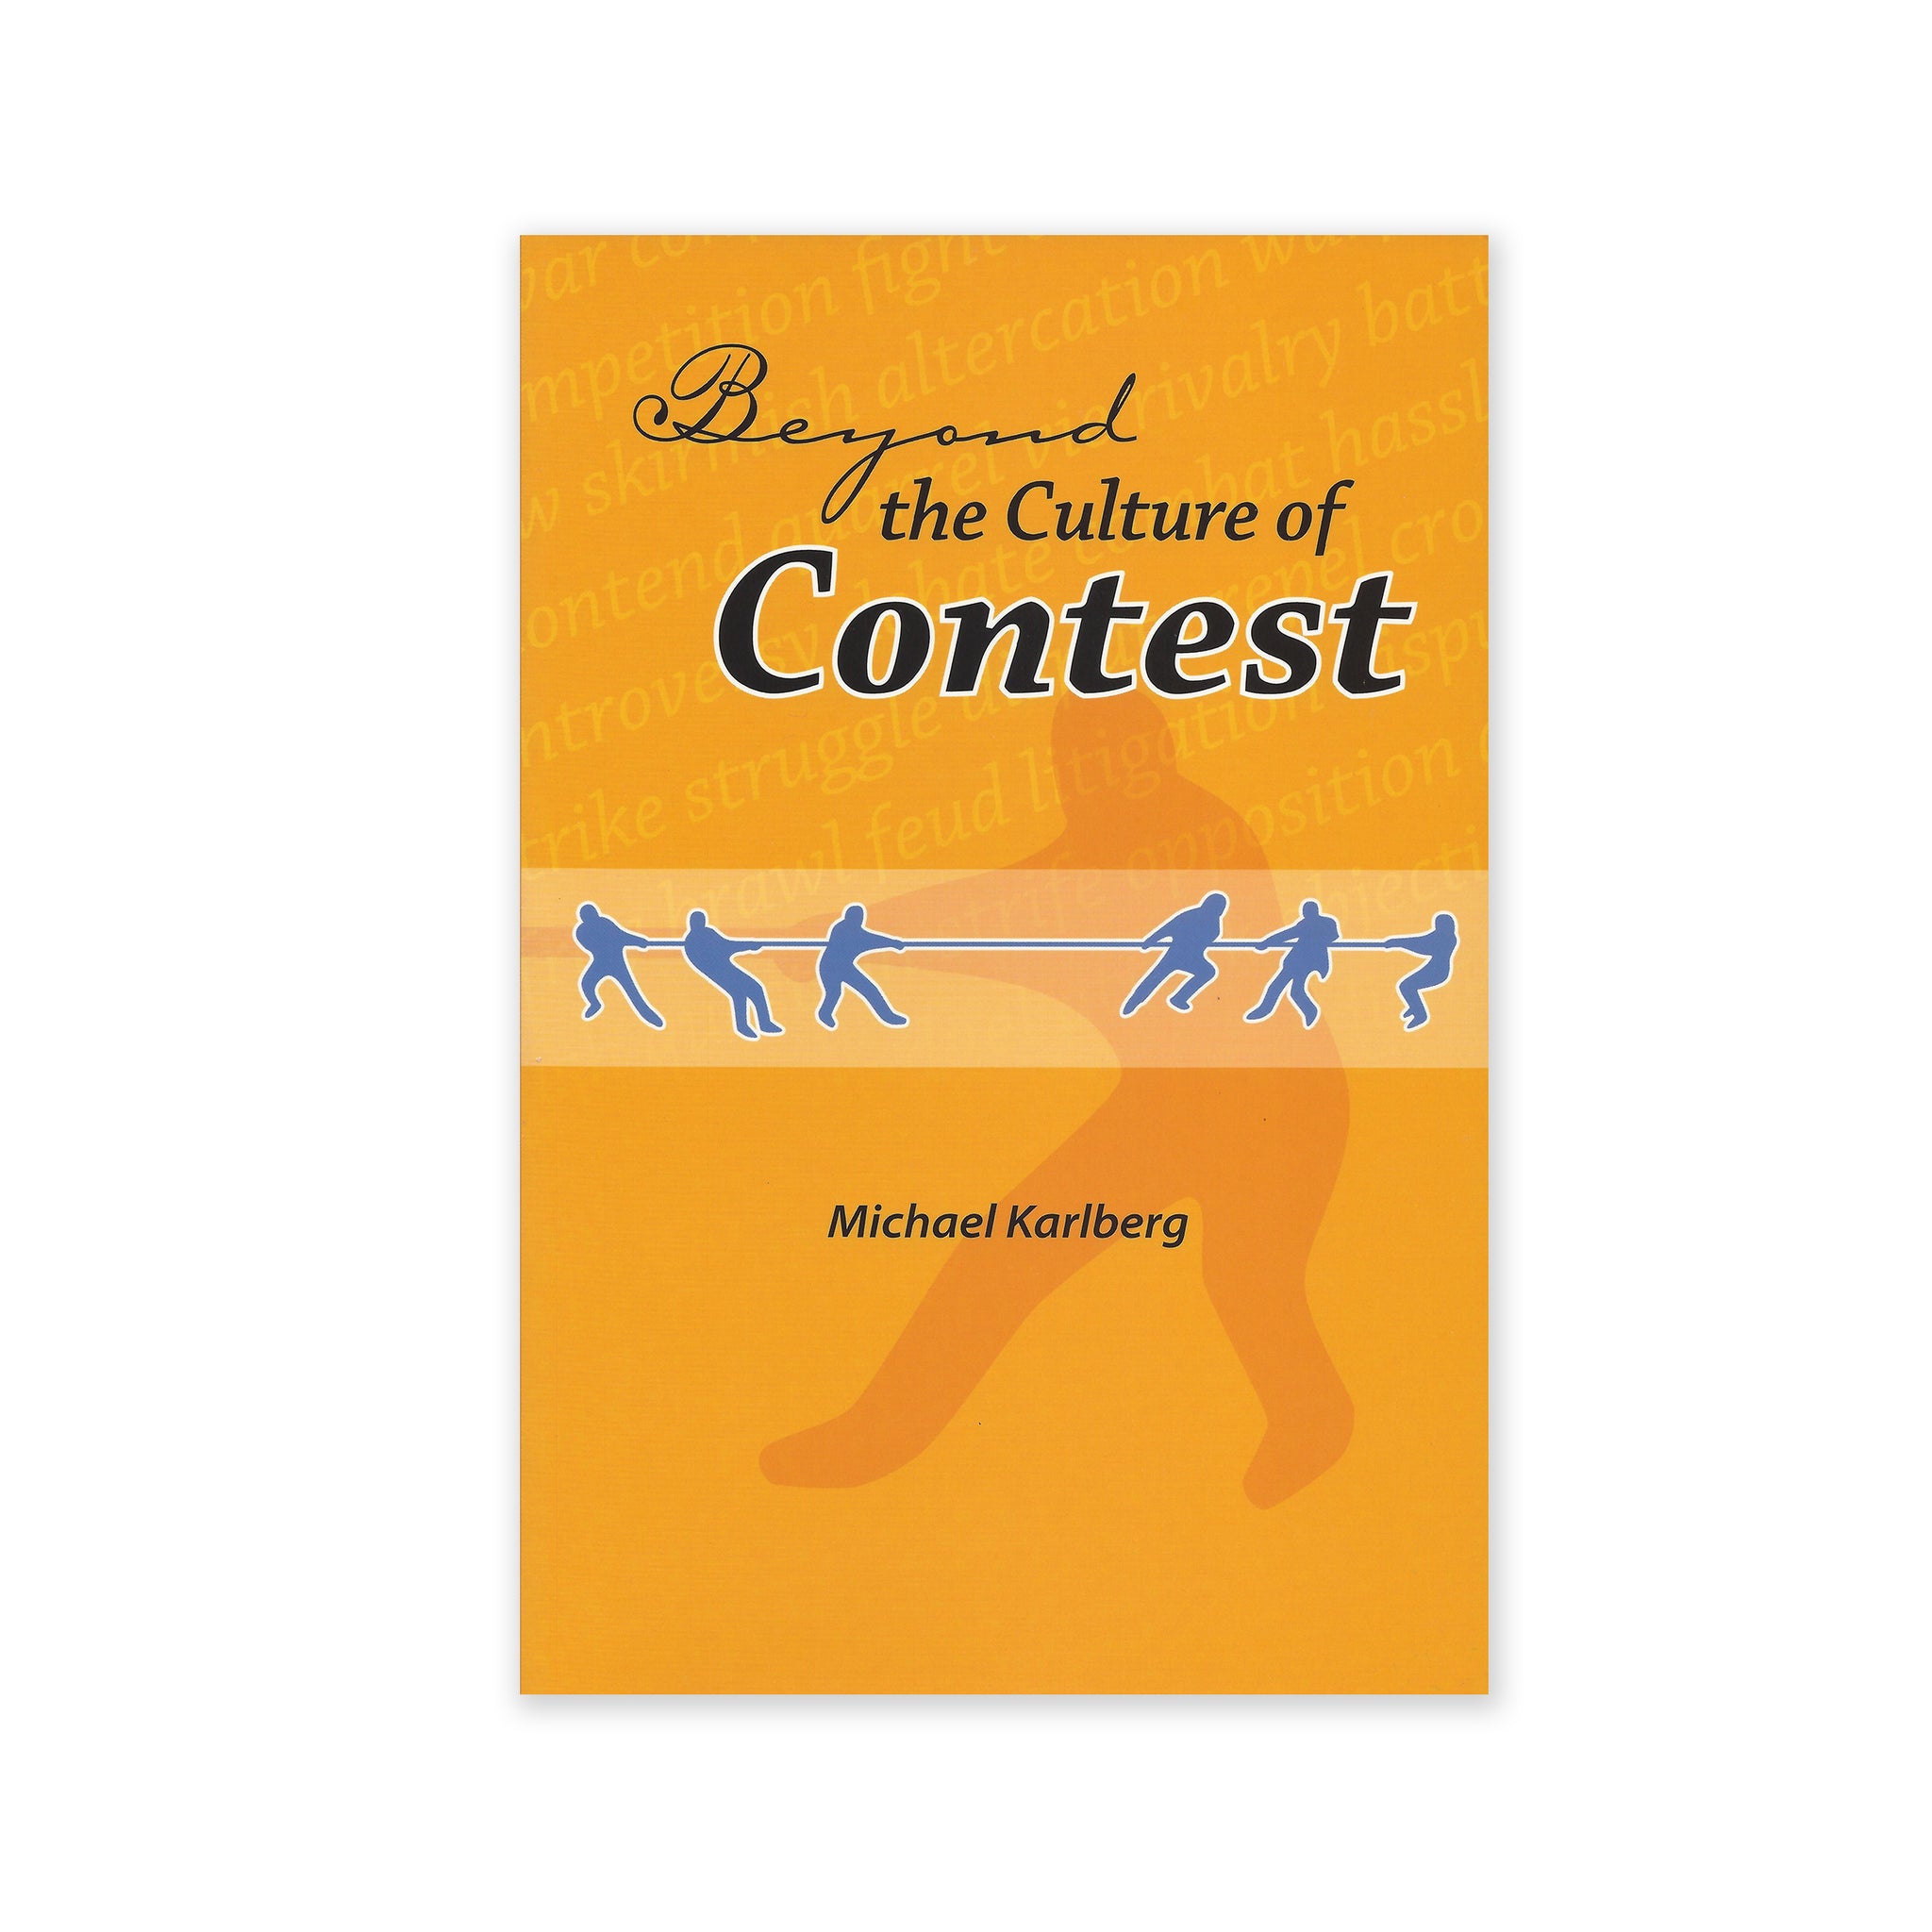 Beyond the Culture of Contest - From Adversarialism To Mutualism In An Age Of Interdependence